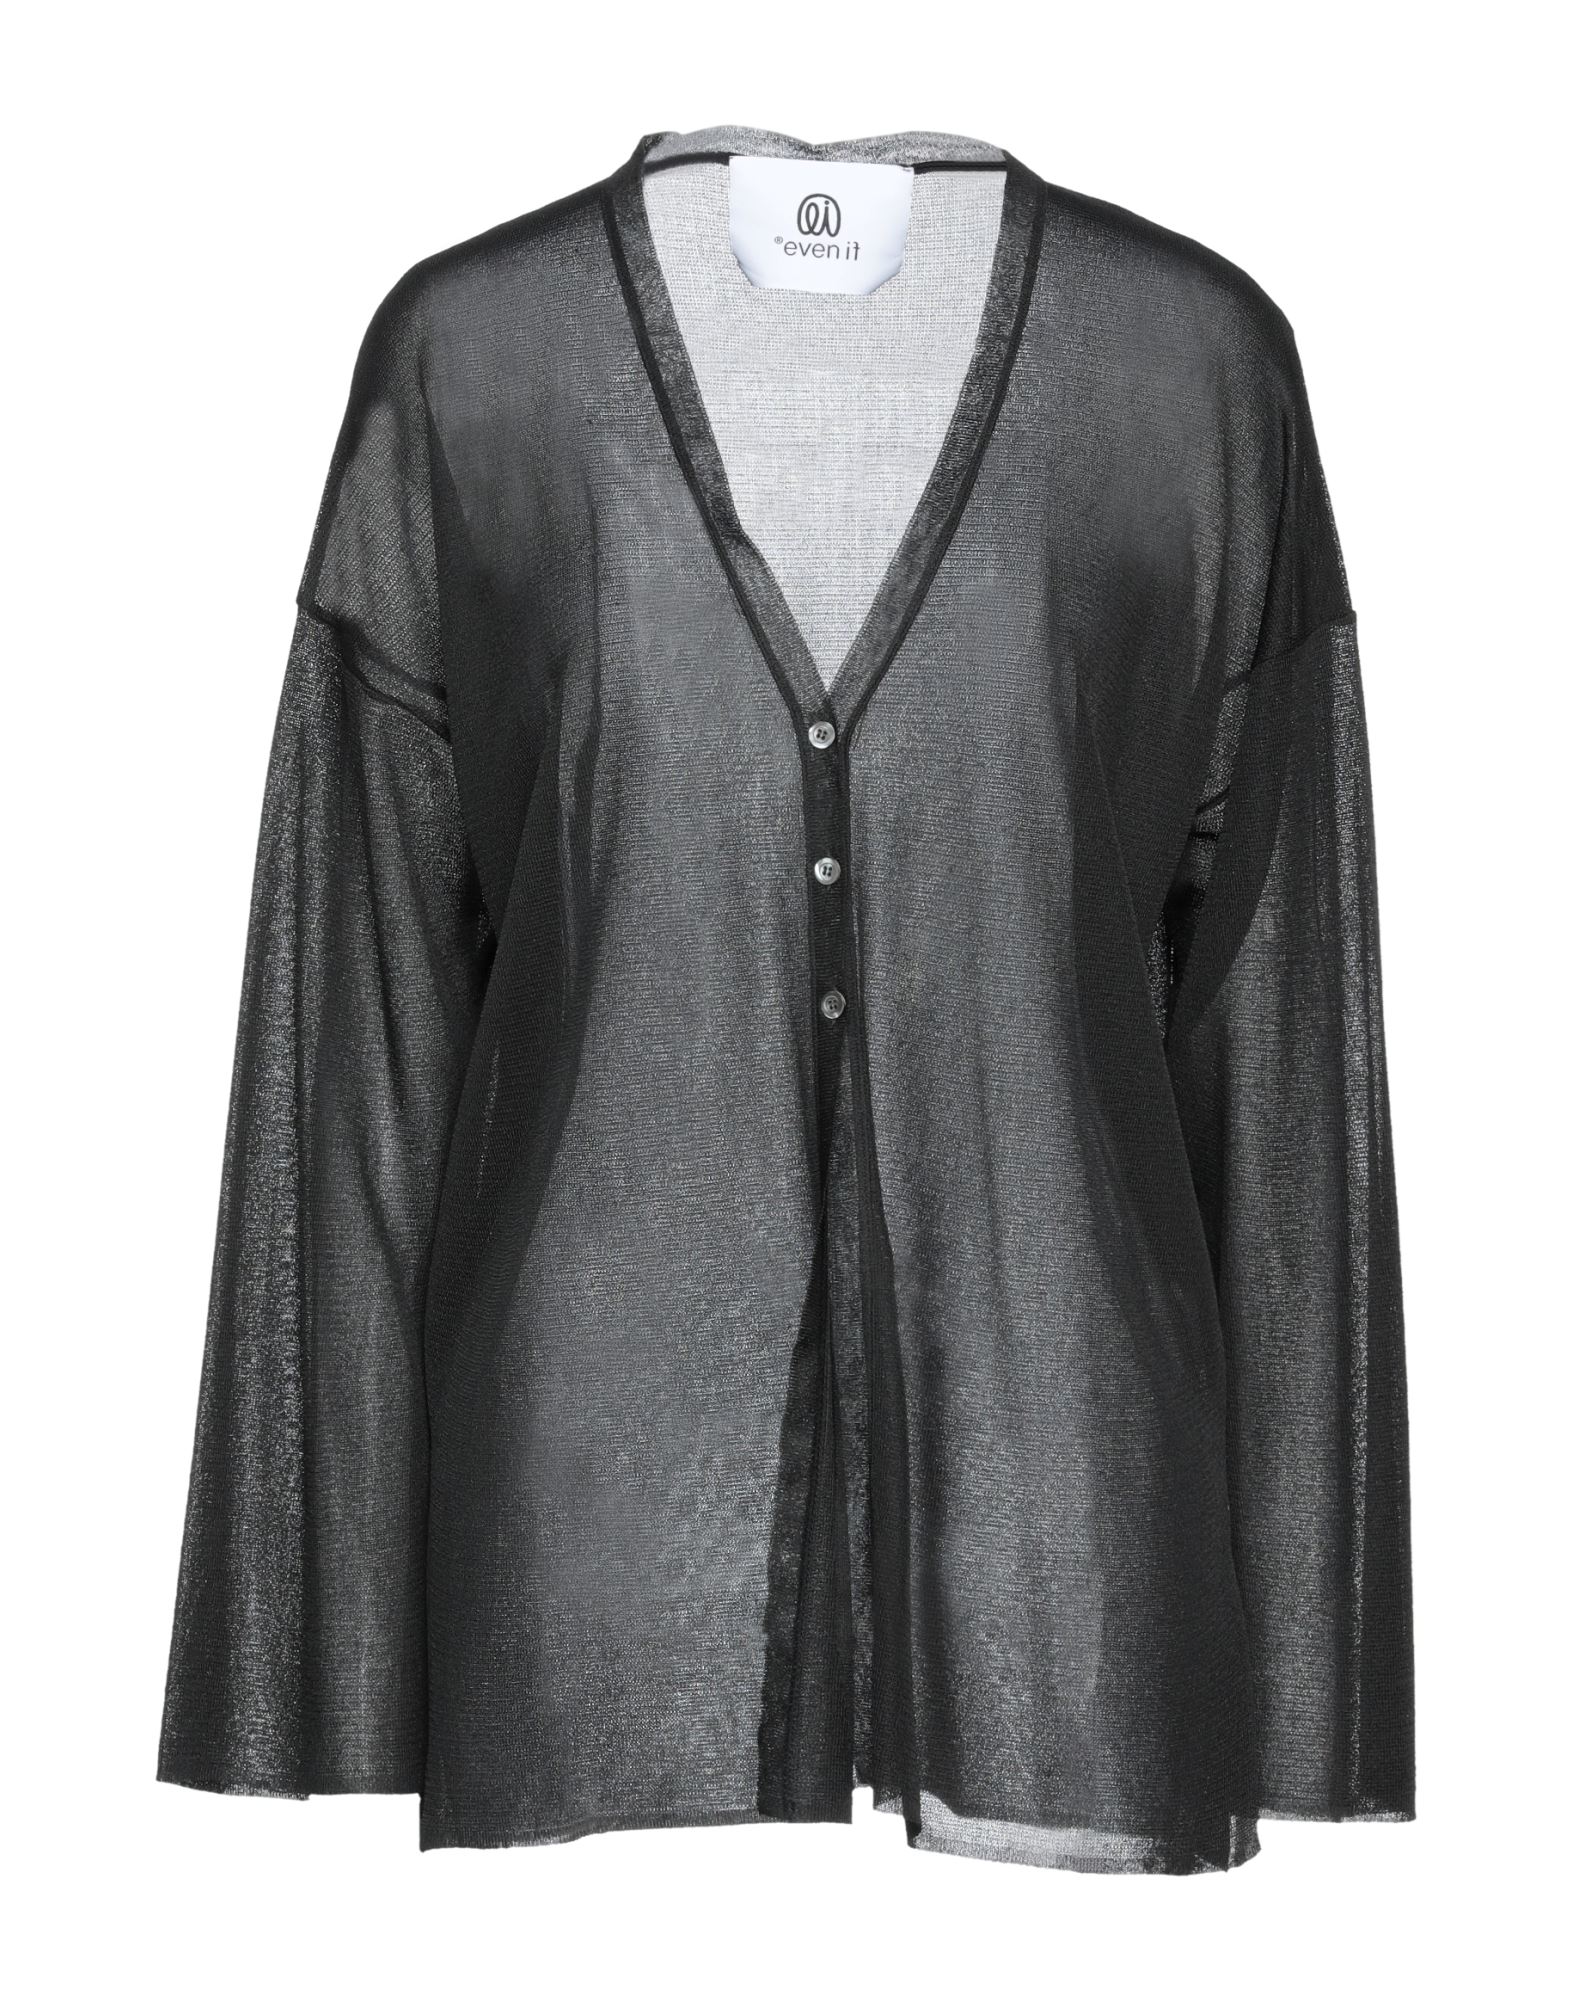 Shop Even If Woman Cardigan Black Size L Viscose, Polyester